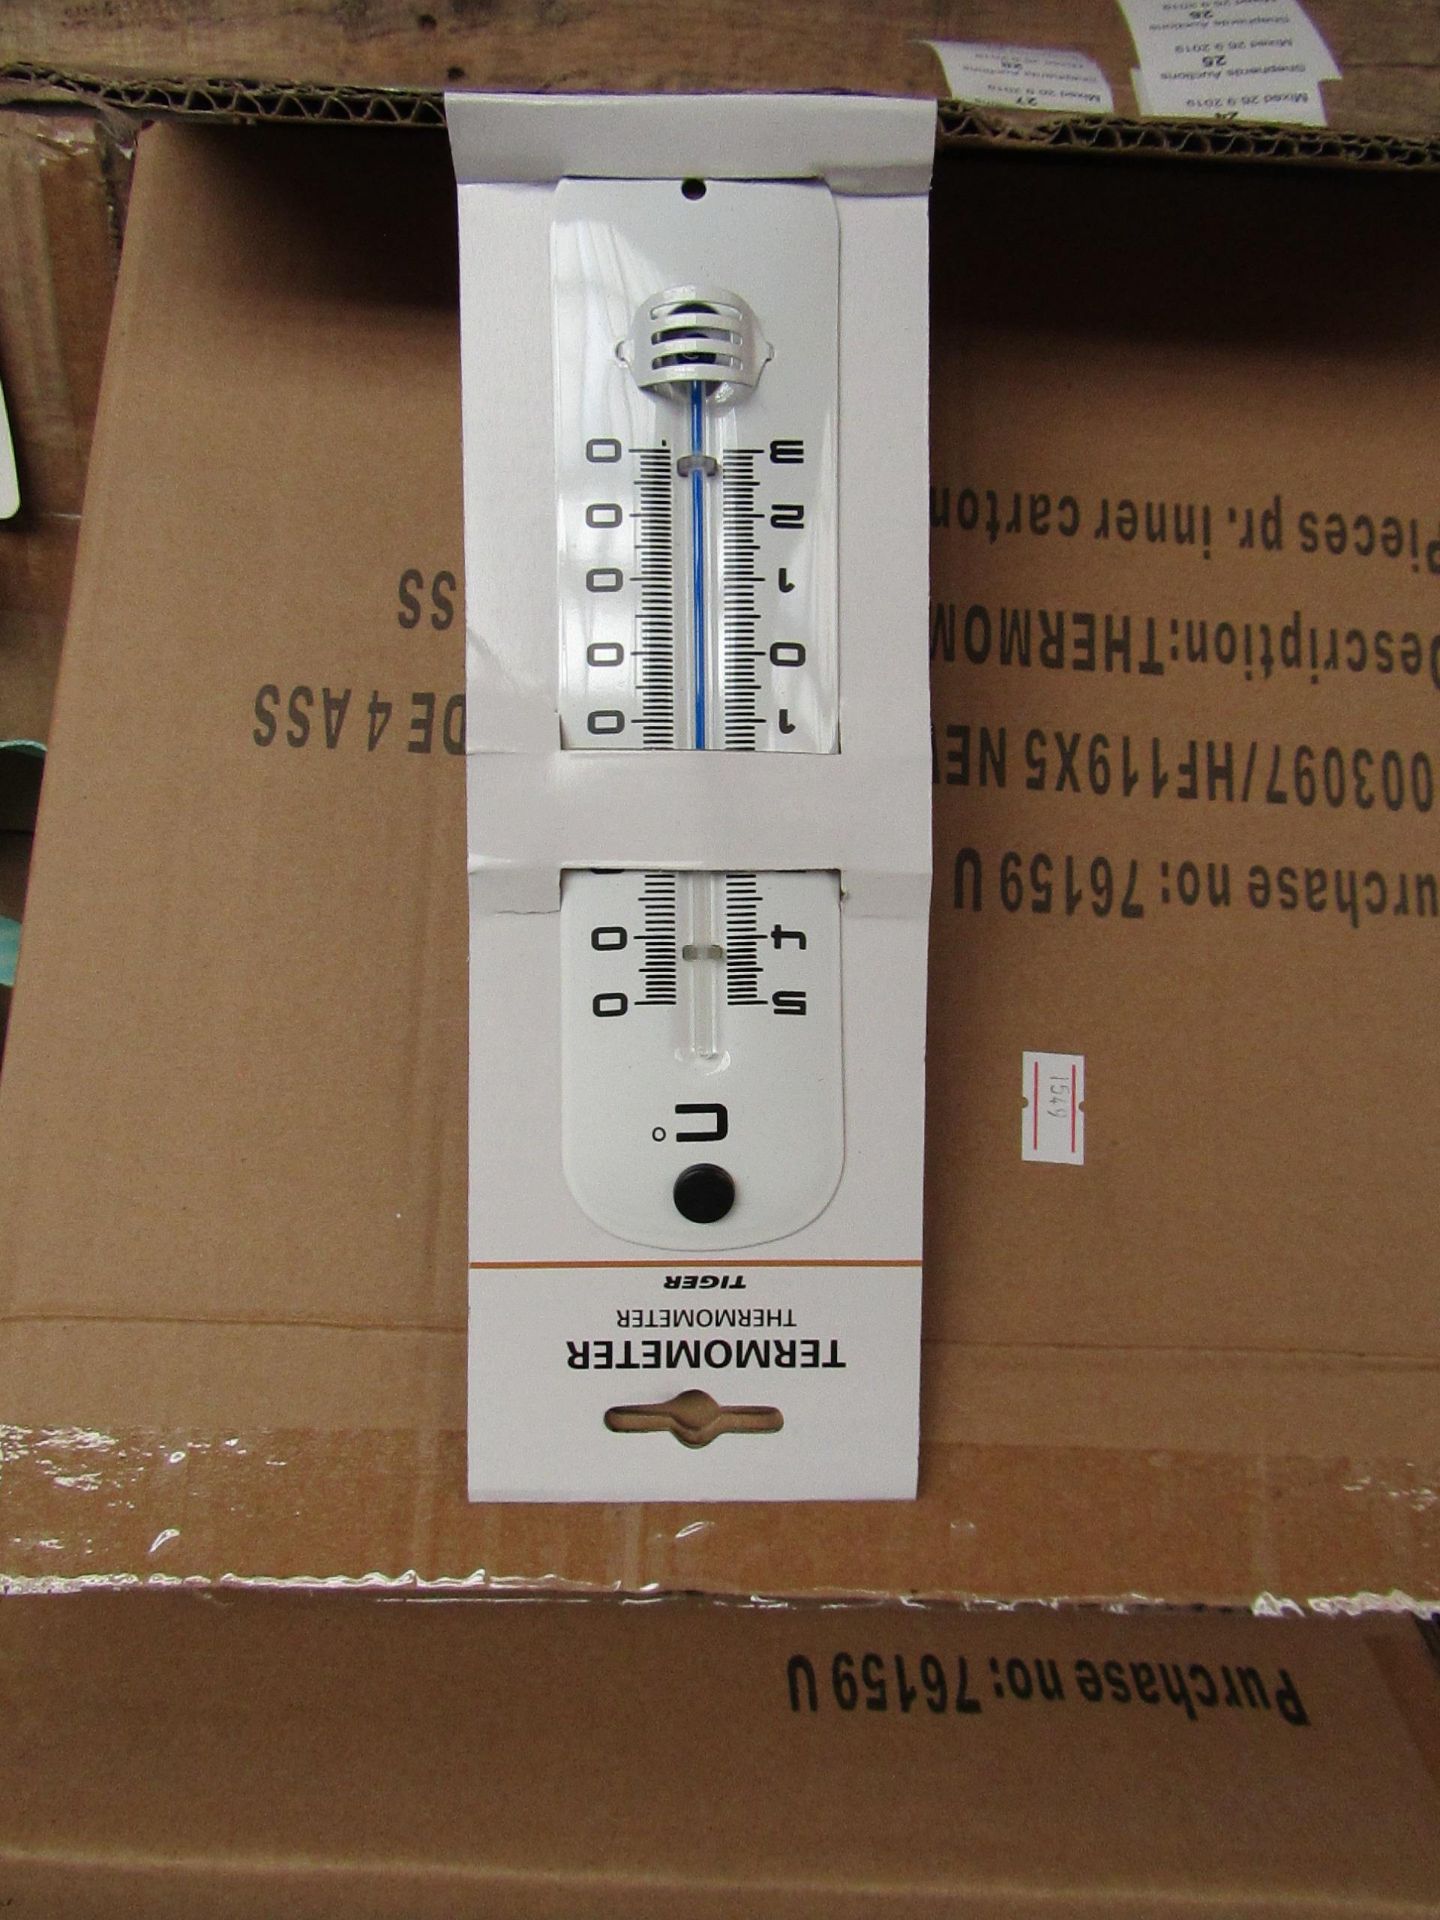 60x Thermometers, all new and boxed.